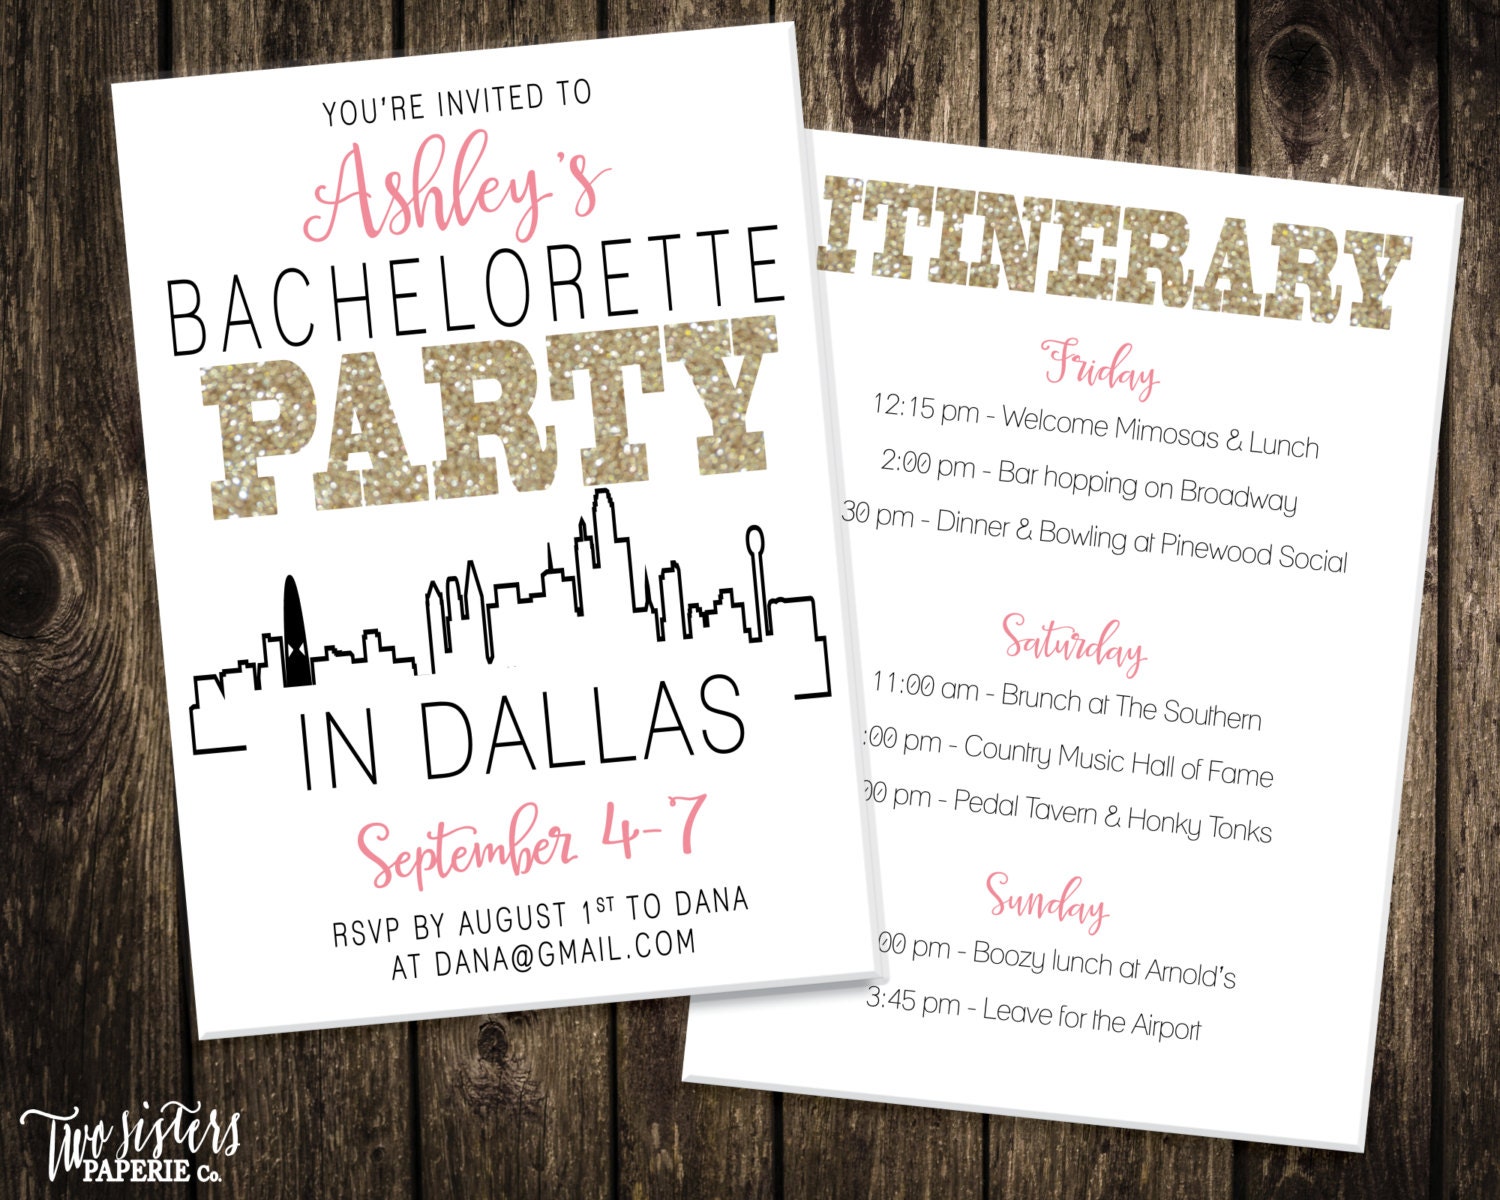 Bachelorette Party Invitations With Itinerary 2